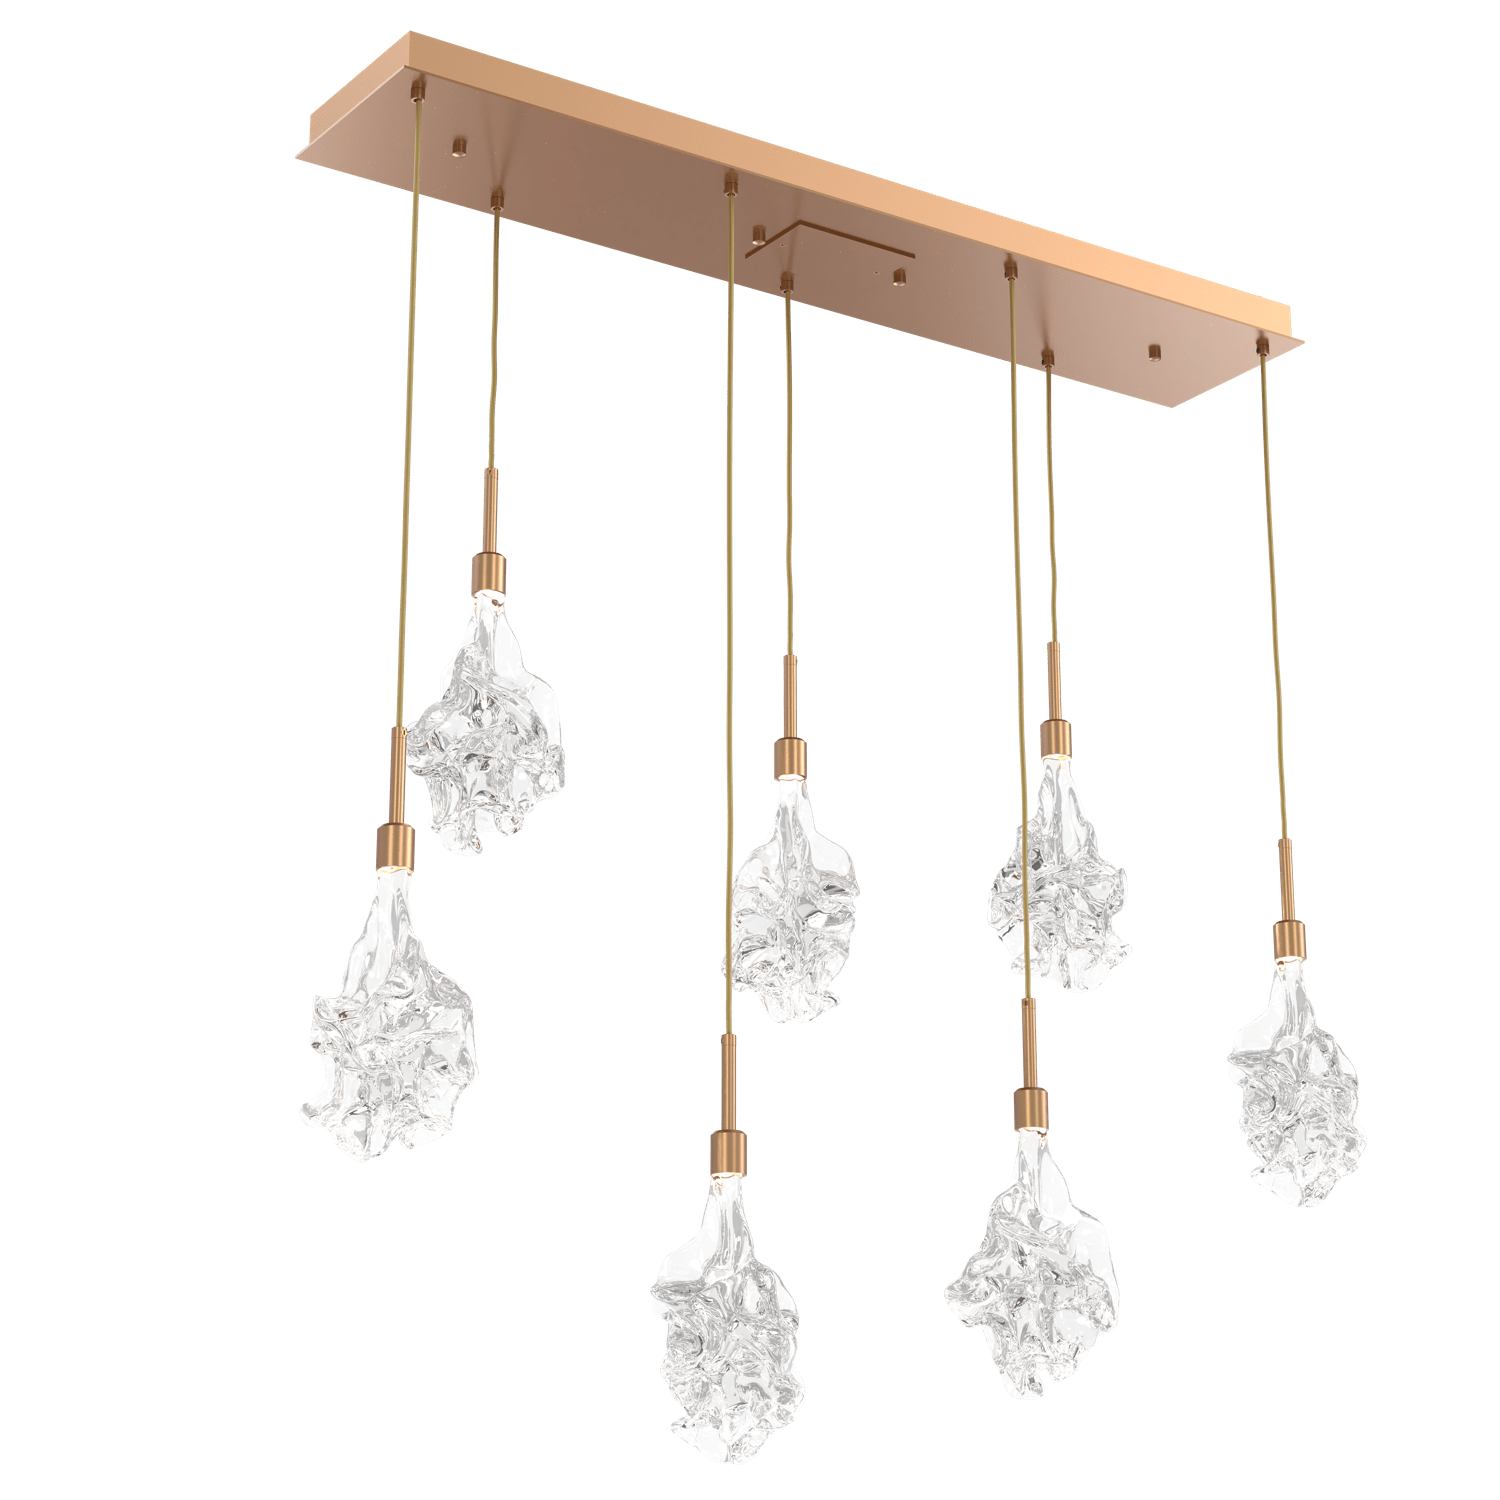 PLB0059-07-NB-Hammerton-Studio-Blossom-7-light-linear-pendant-chandelier-with-novel-brass-finish-and-clear-handblown-crystal-glass-shades-and-LED-lamping